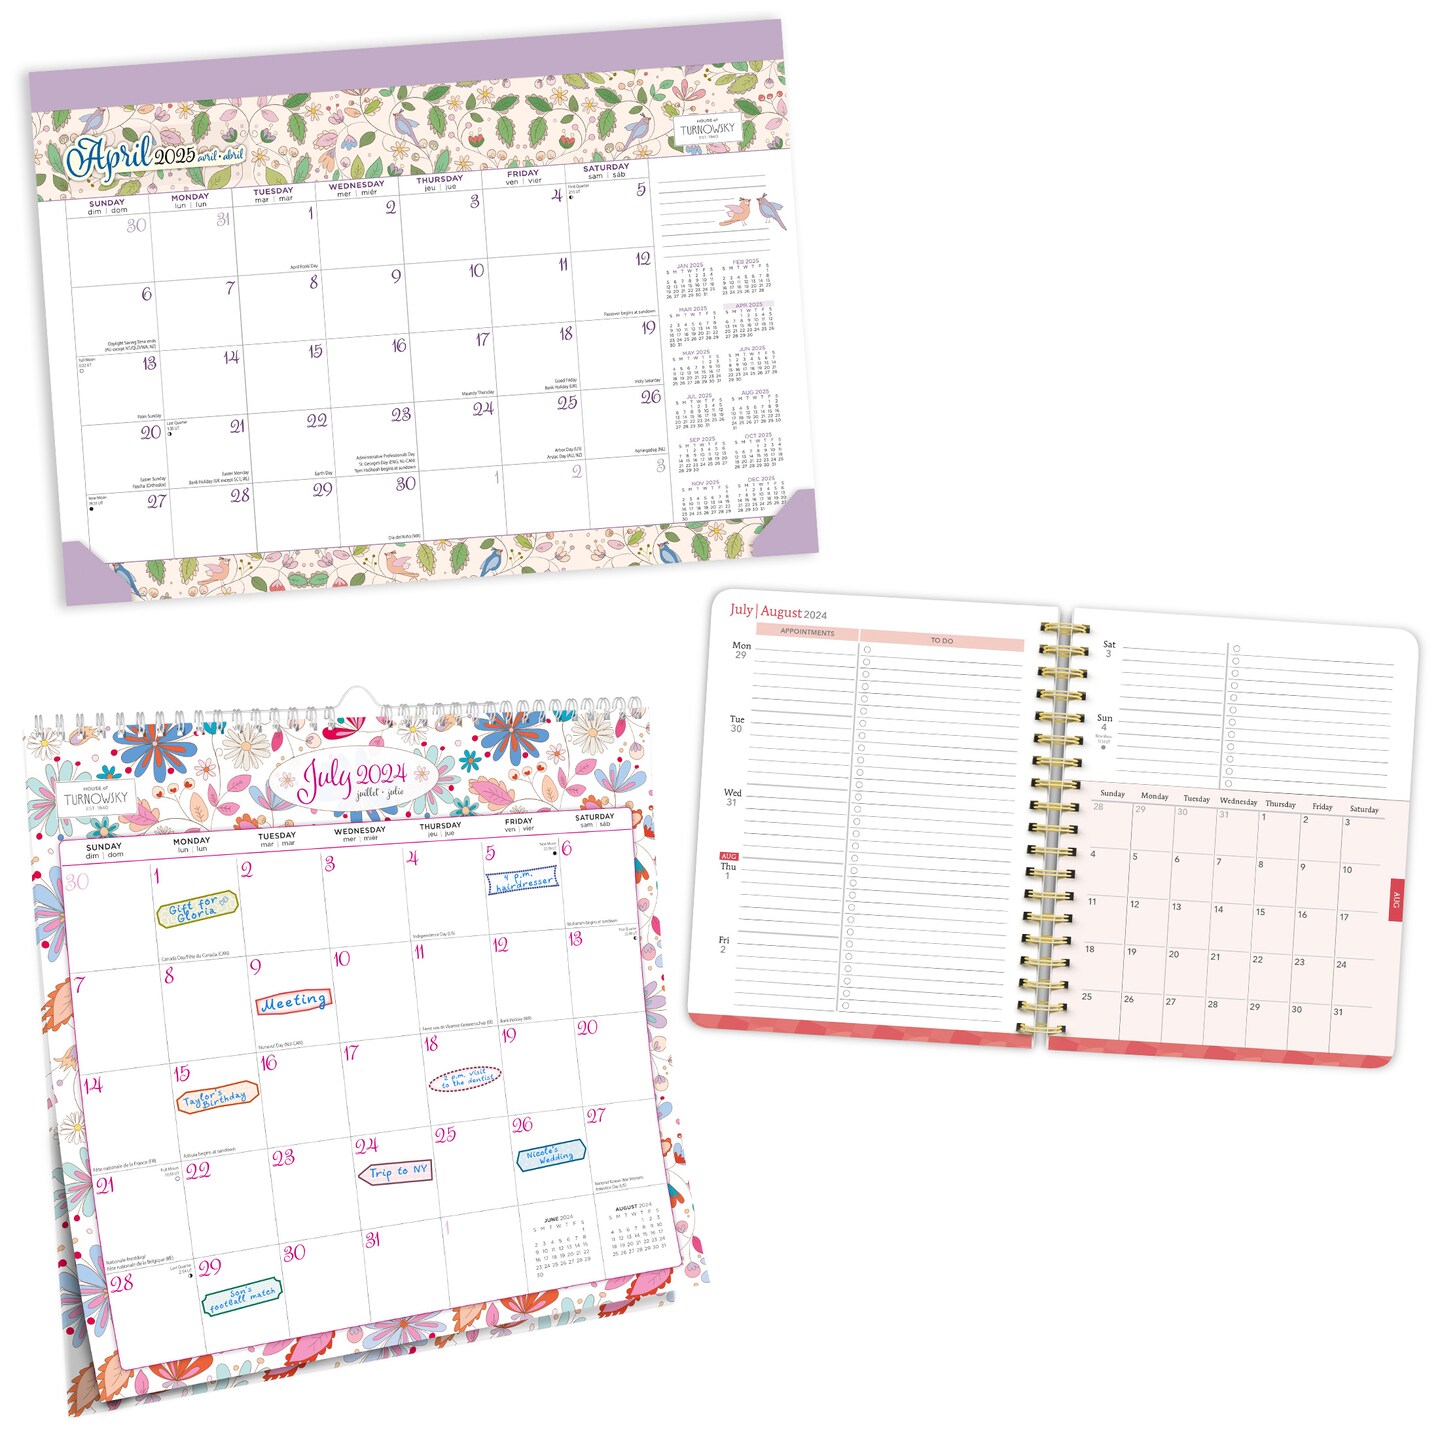 House of Turnowsky and Black Solid 2025 18 Months Bundle | Desk Pad, Desk Planner, and Square Wire-O Calendar | July 2024 - December 2025 | Plato | Family Stationery Design